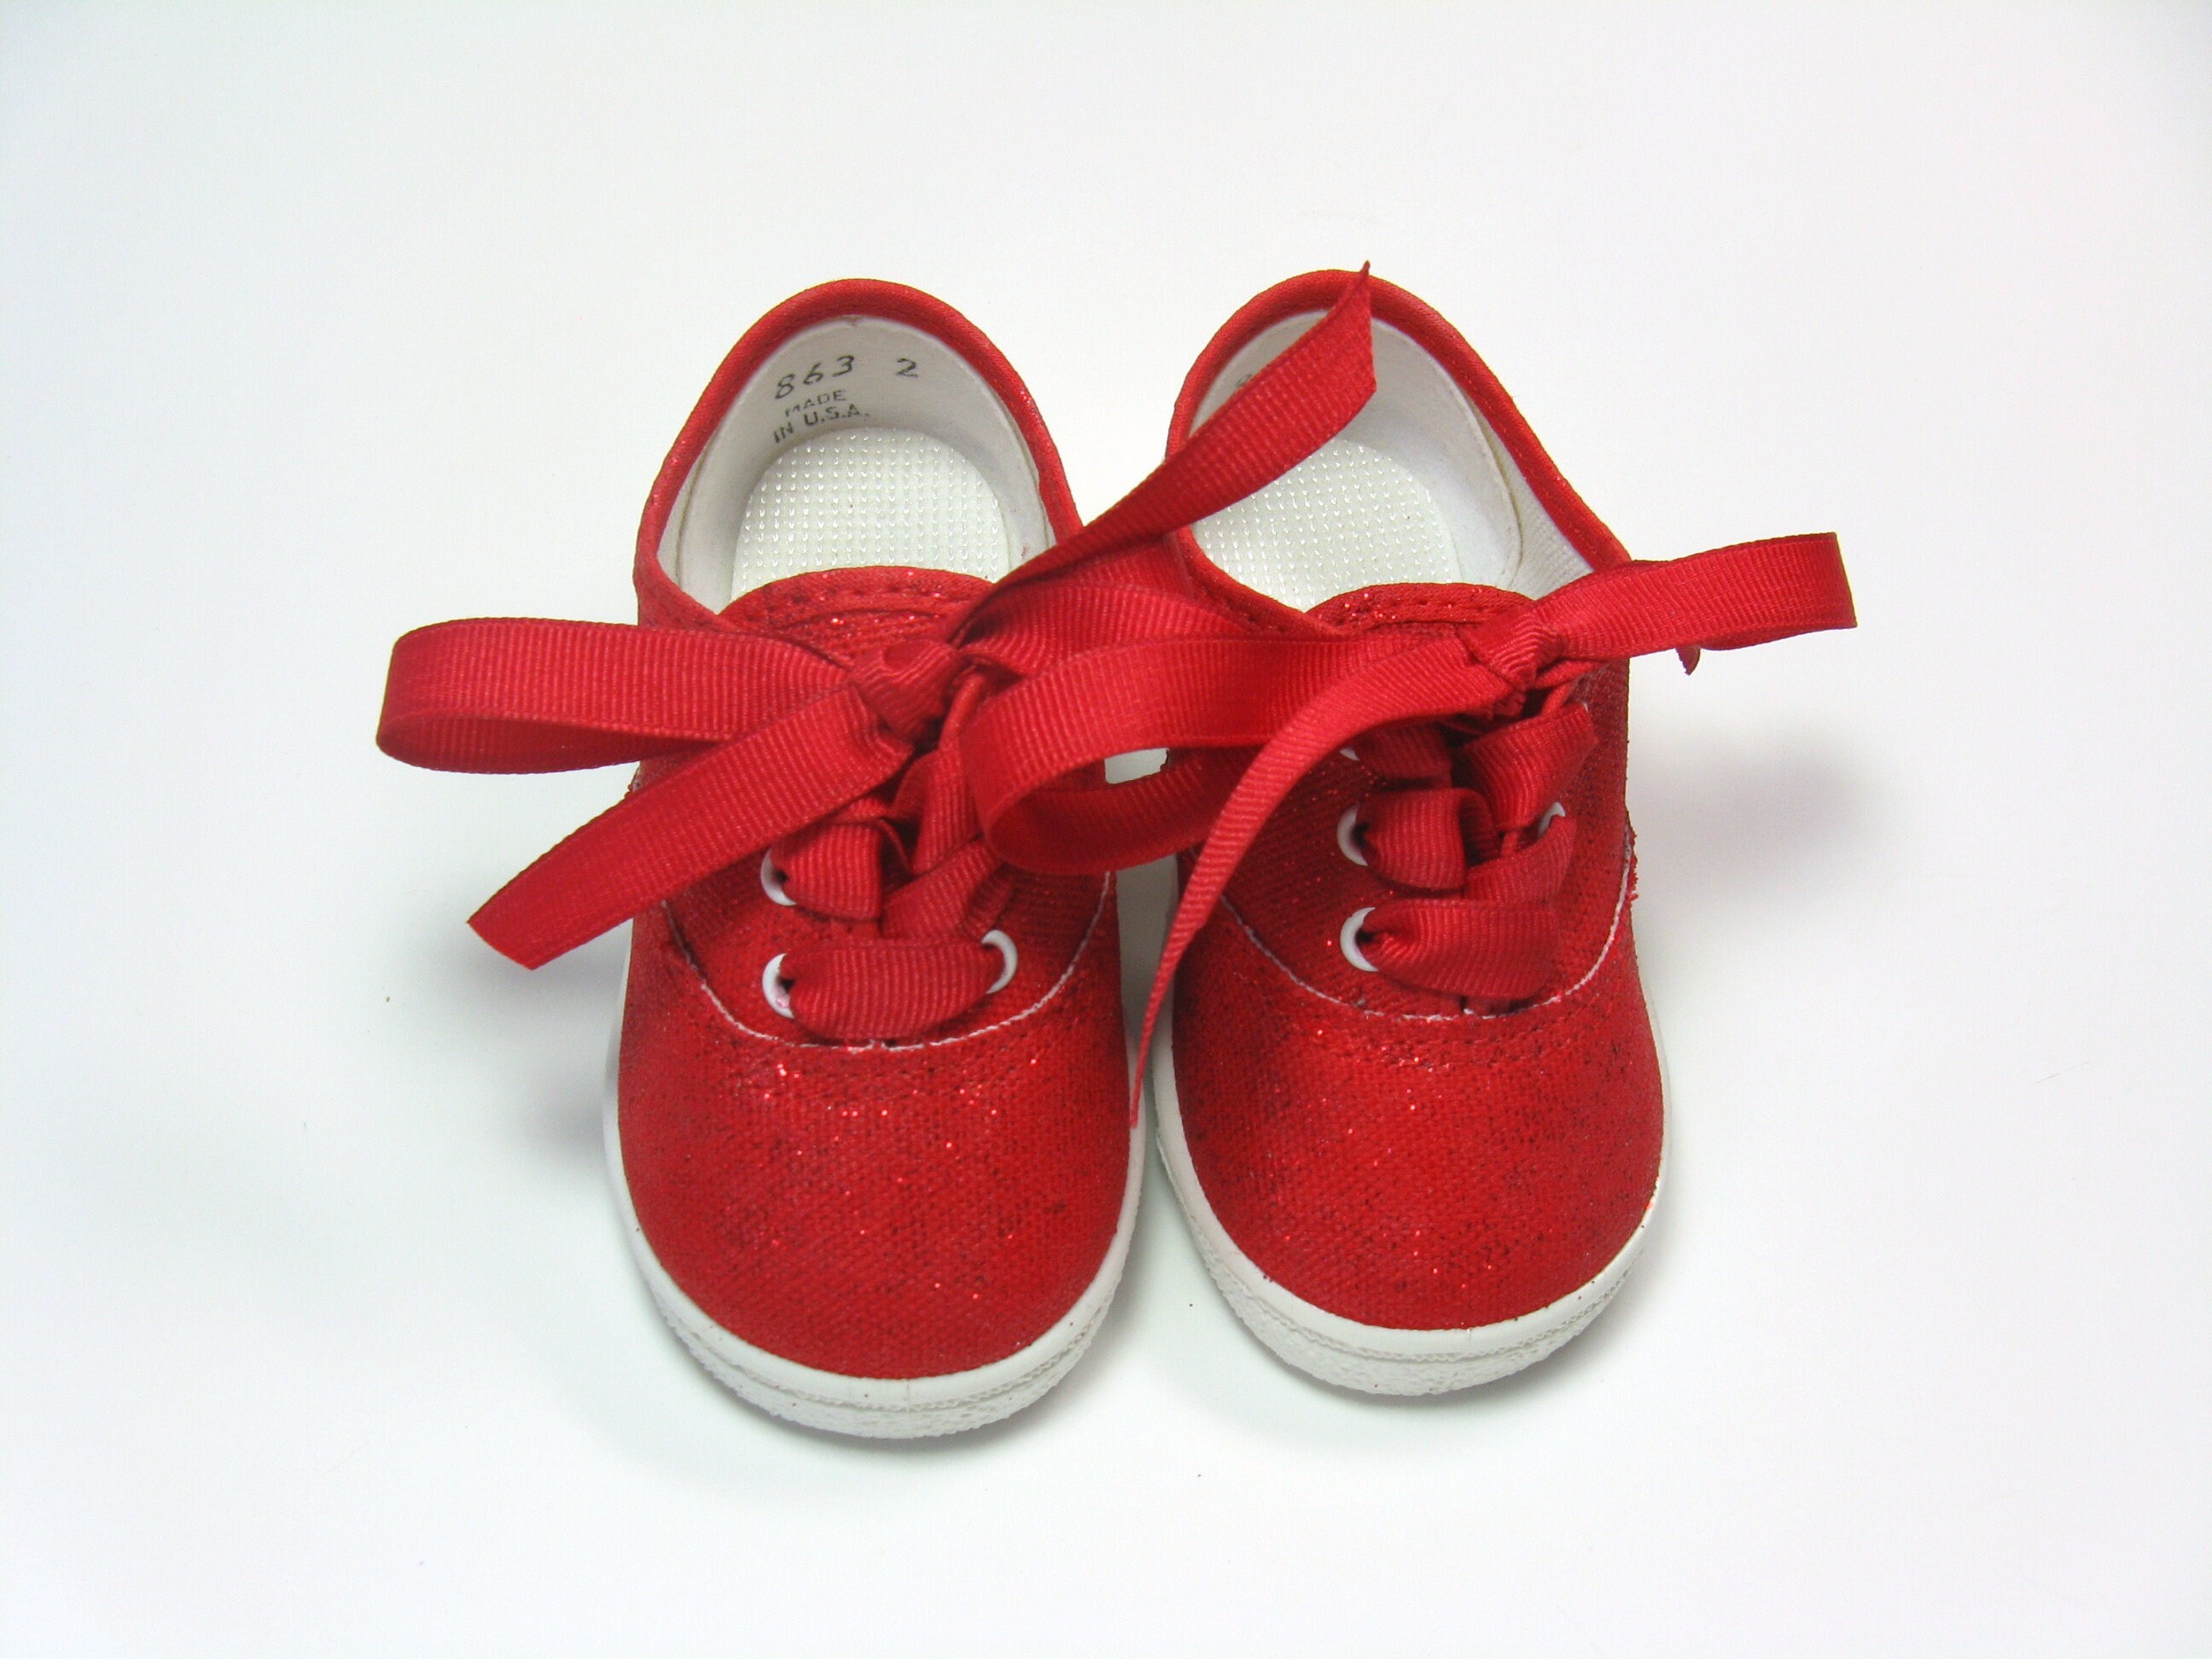 Sparkled Christmas Sneakers For Infant Size 2 Schoenen Meisjesschoenen Sneakers & Sportschoenen Red Glitter Baby Shoes 